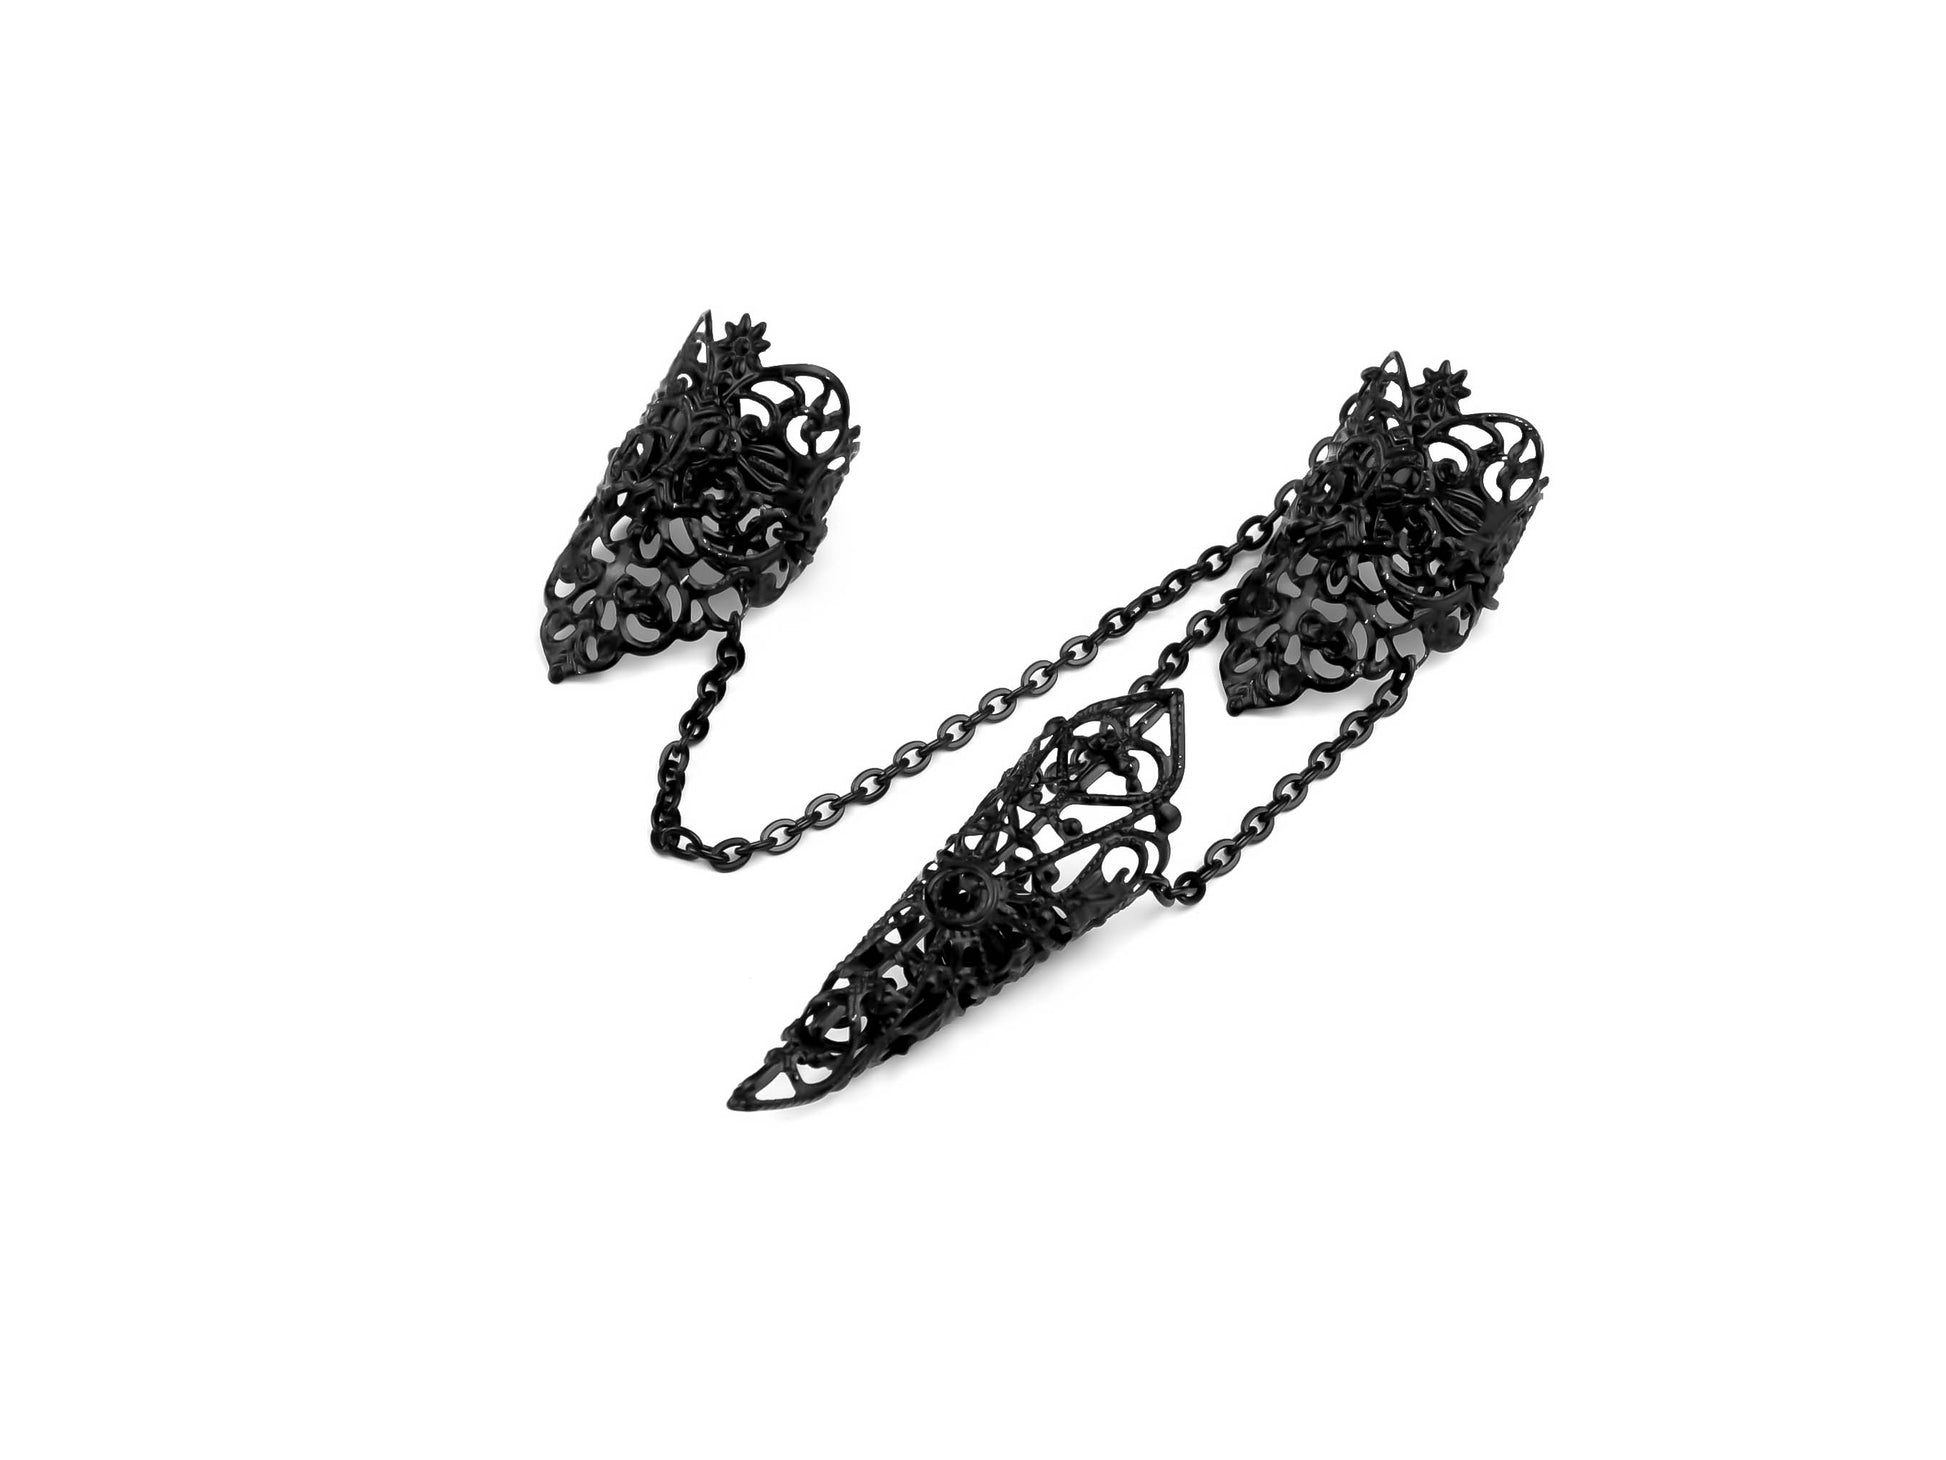 This Myril Jewels gothic black double ring with nail claw design is an edgy piece for lovers of dark, avant-garde fashion. A must-have for Halloween, it's ideal for punk, neo-gothic, and witchcore aesthetics. The daring design is perfect for drag queens, festival-goers, and as a bold statement in minimal goth attire, making it a striking goth girlfriend or friend gift.